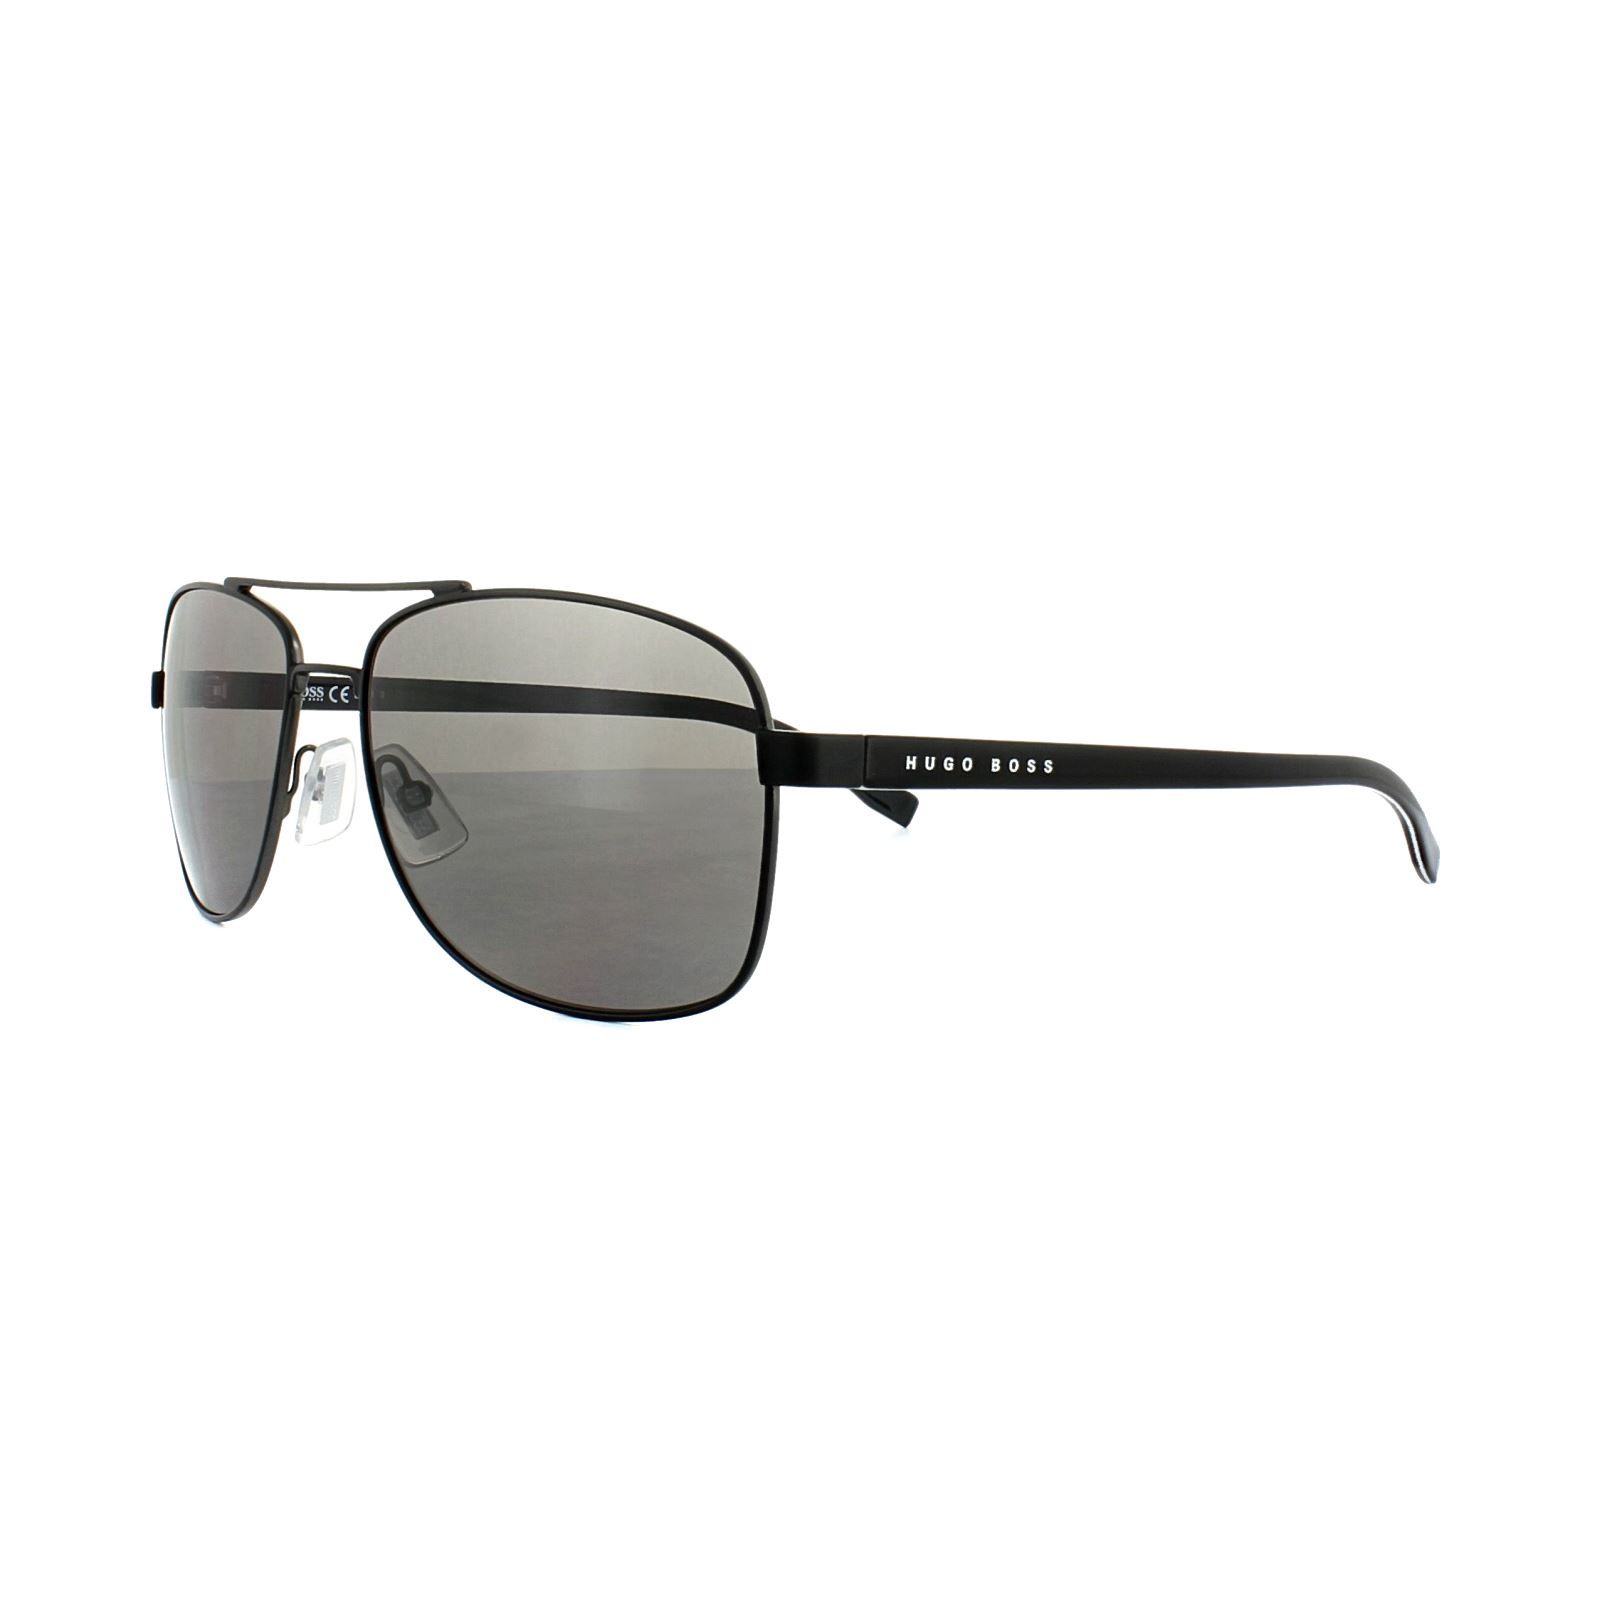 Hugo Boss Sunglasses 0762/S QIL Y1 Matt Black Grey are a smaller aviator style with classic double bridge and timeless appeal. The Hugo Boss logo appears in contrasting colour on the temple.